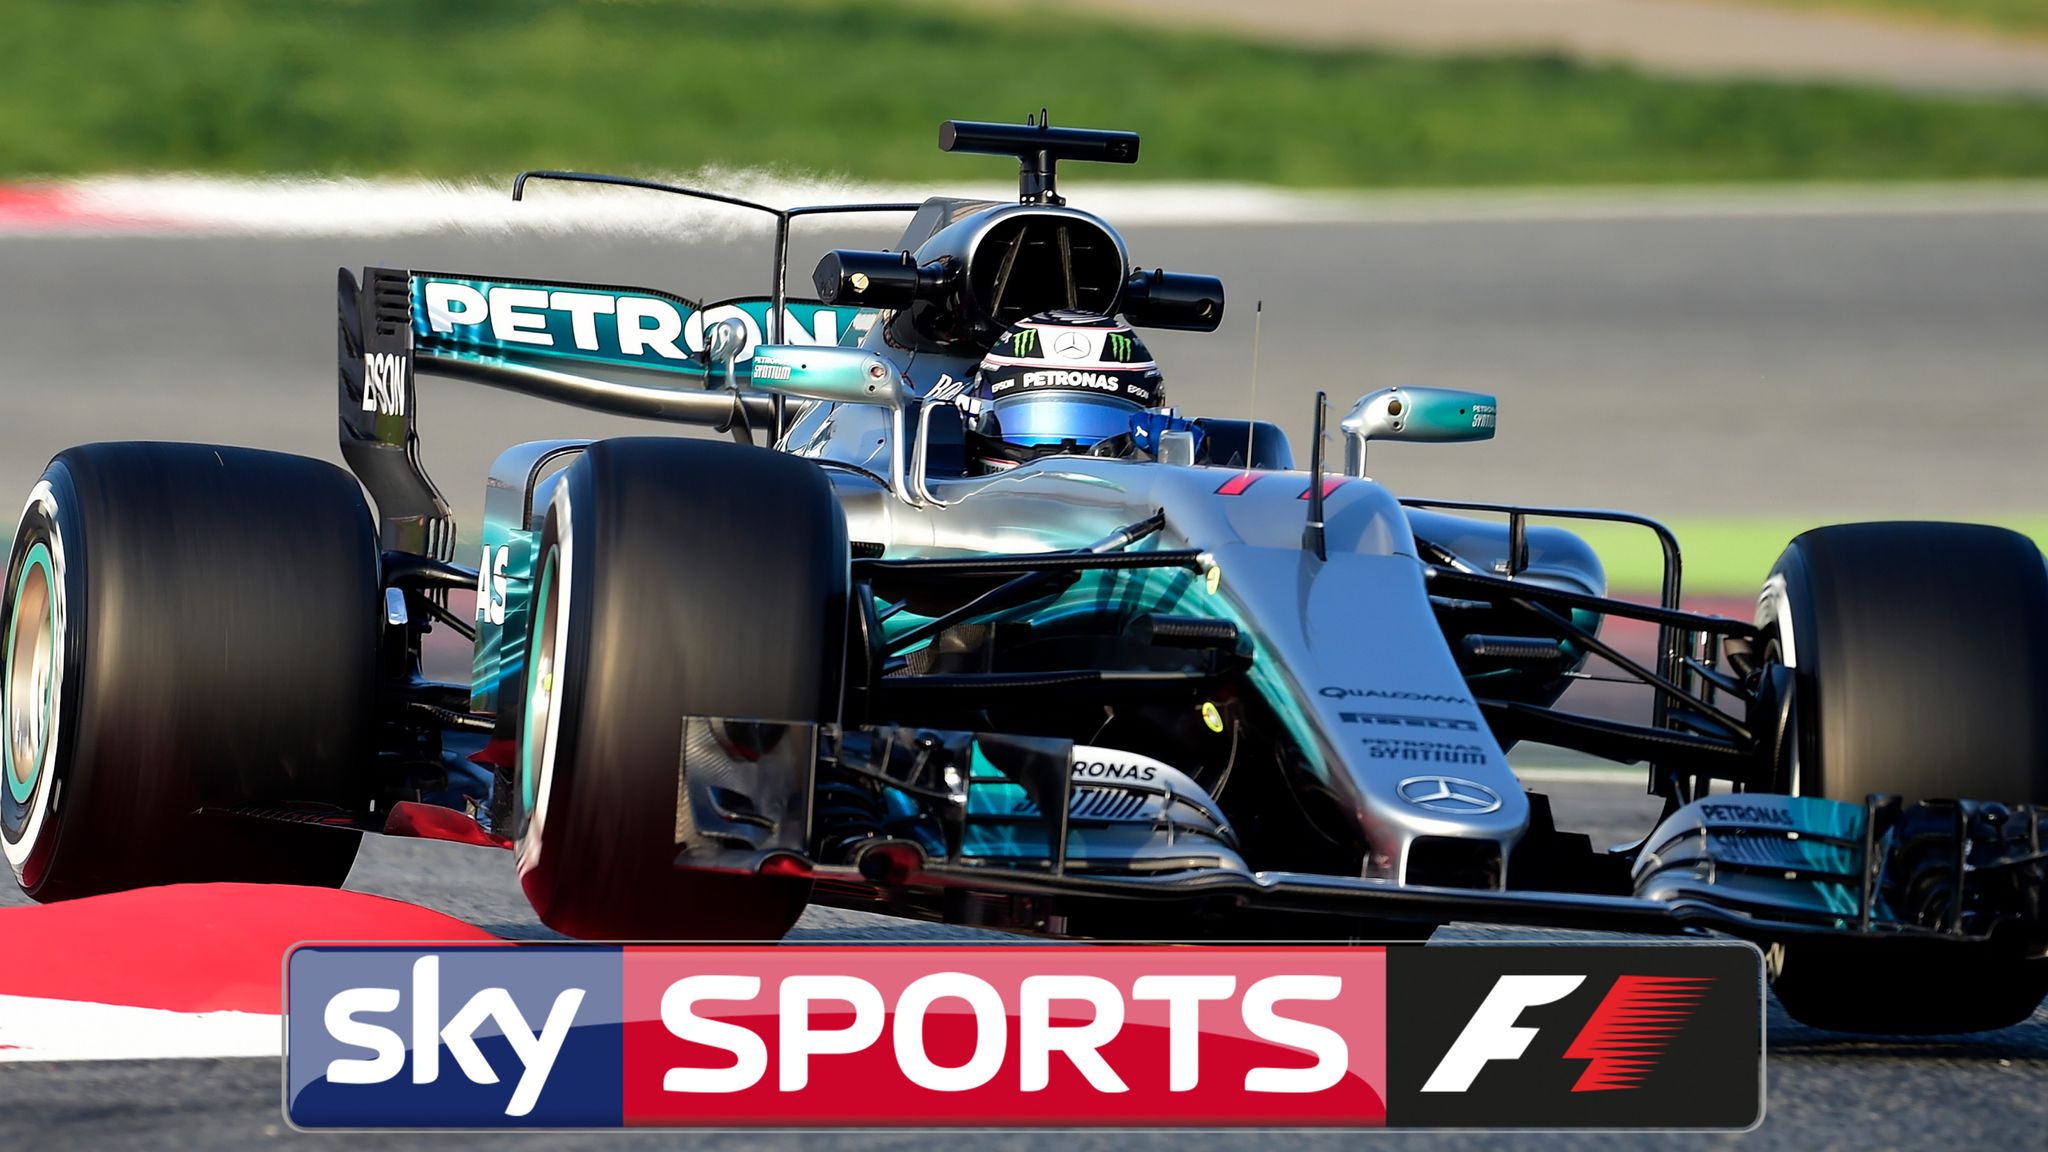 F1 In 17 Predict The Constructors Championship Standings F1 News